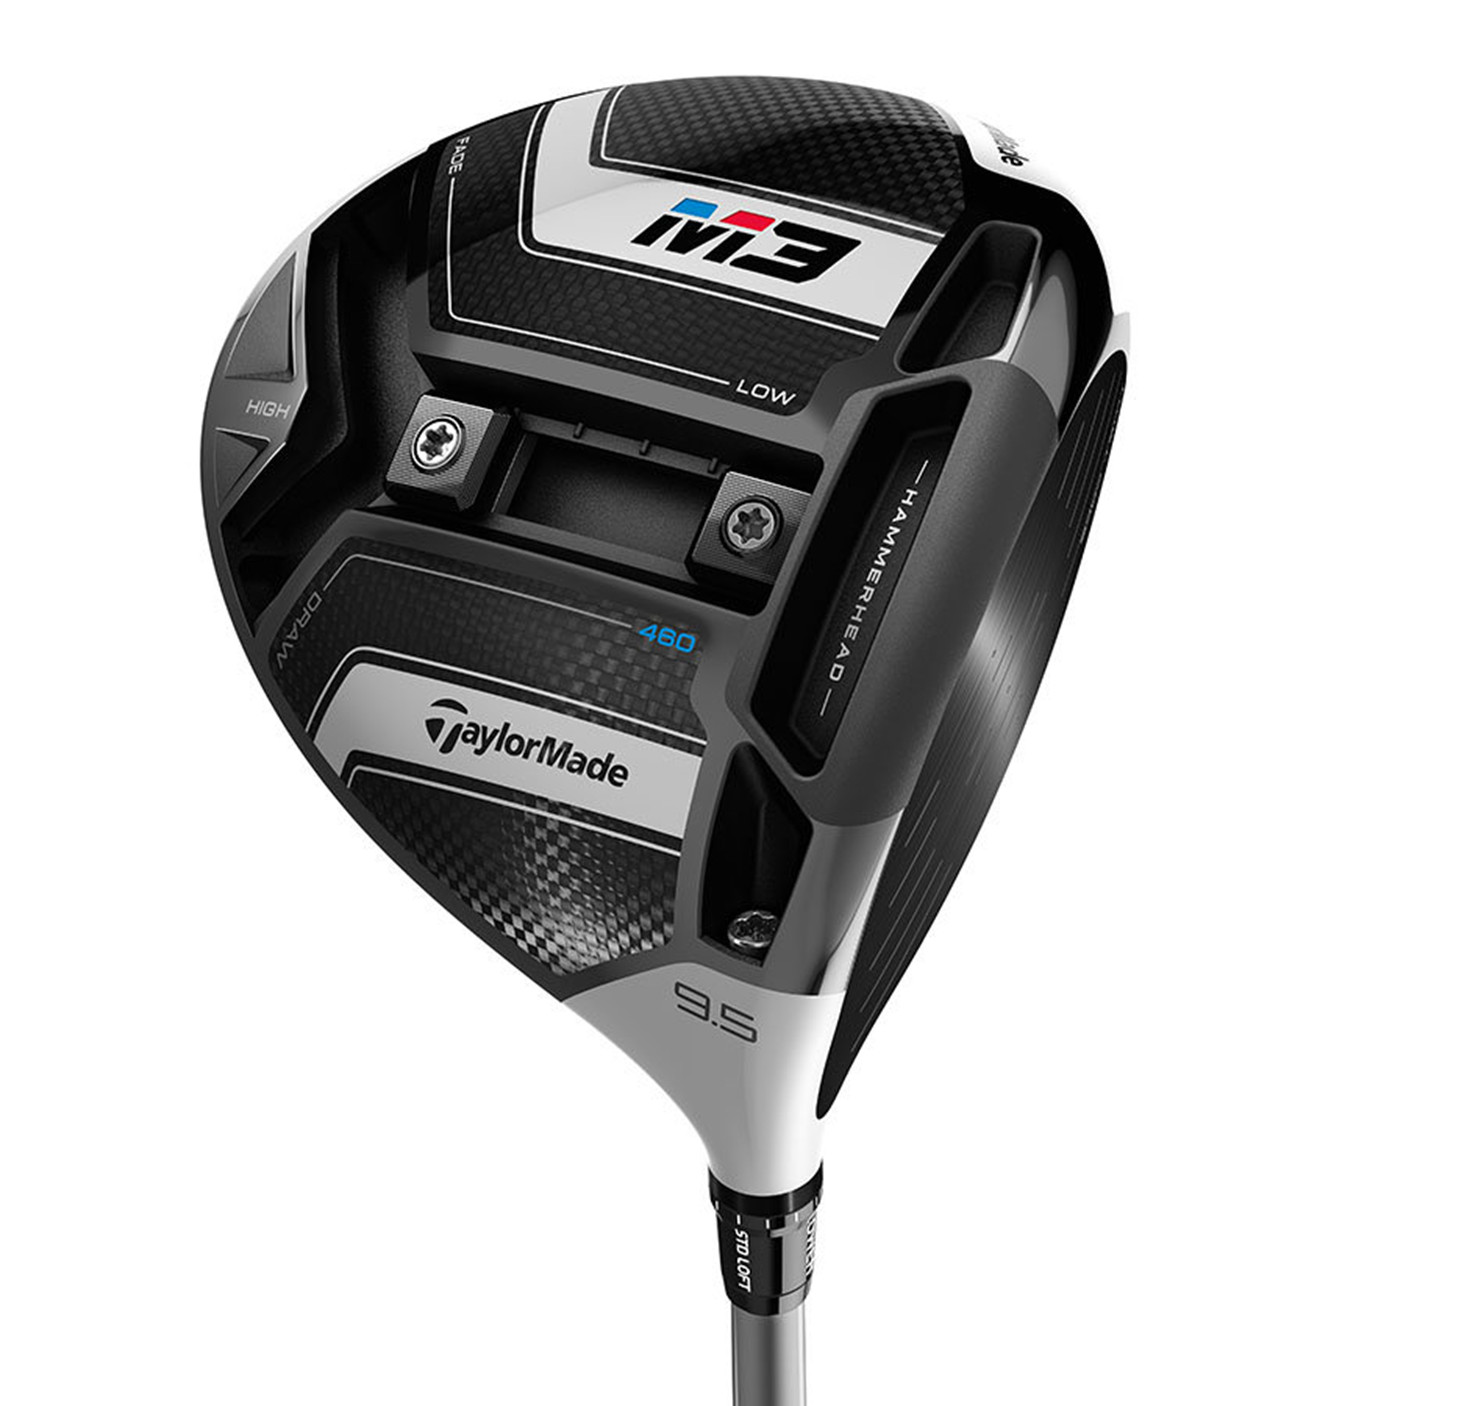 The 2018 Taylormade M3 Driver